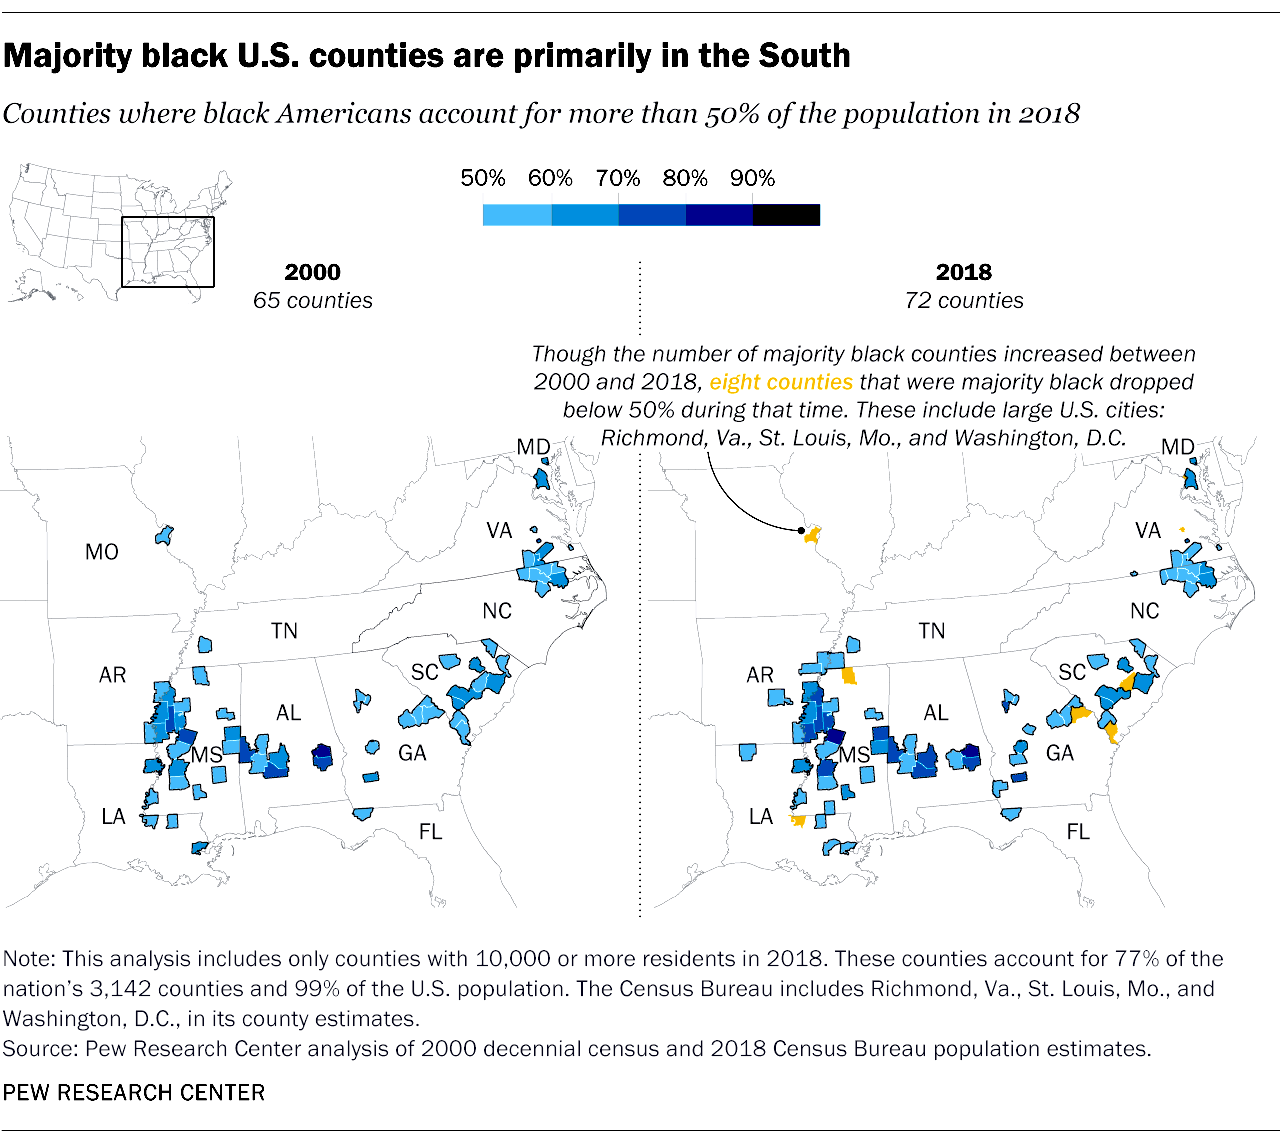 The Majority of Black U.S. counties are primarily in the South